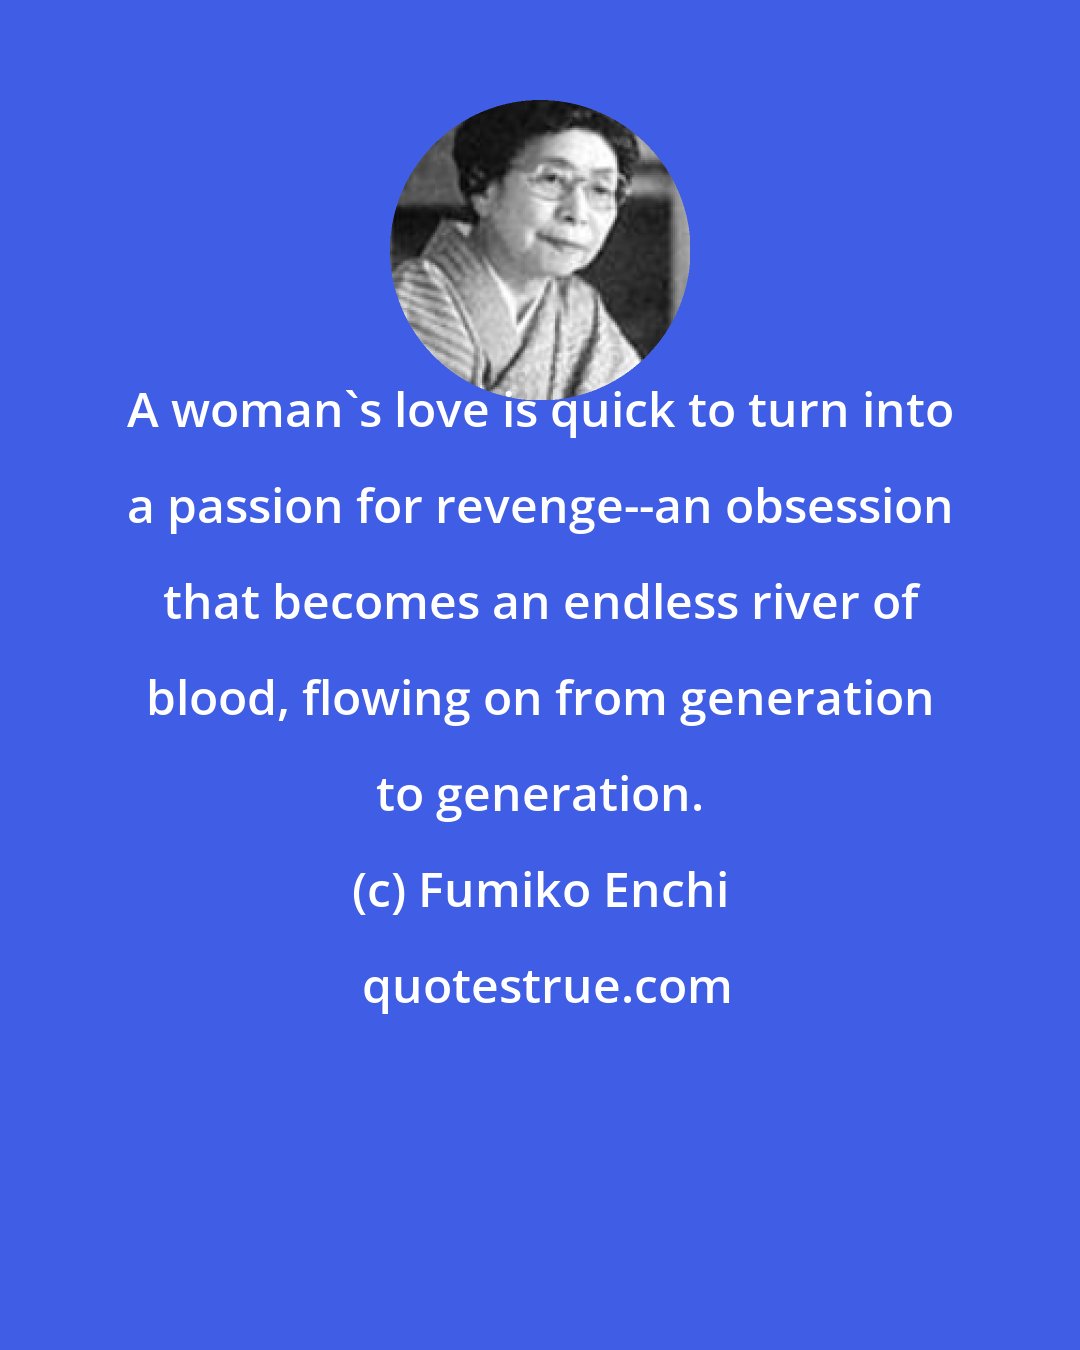 Fumiko Enchi: A woman's love is quick to turn into a passion for revenge--an obsession that becomes an endless river of blood, flowing on from generation to generation.